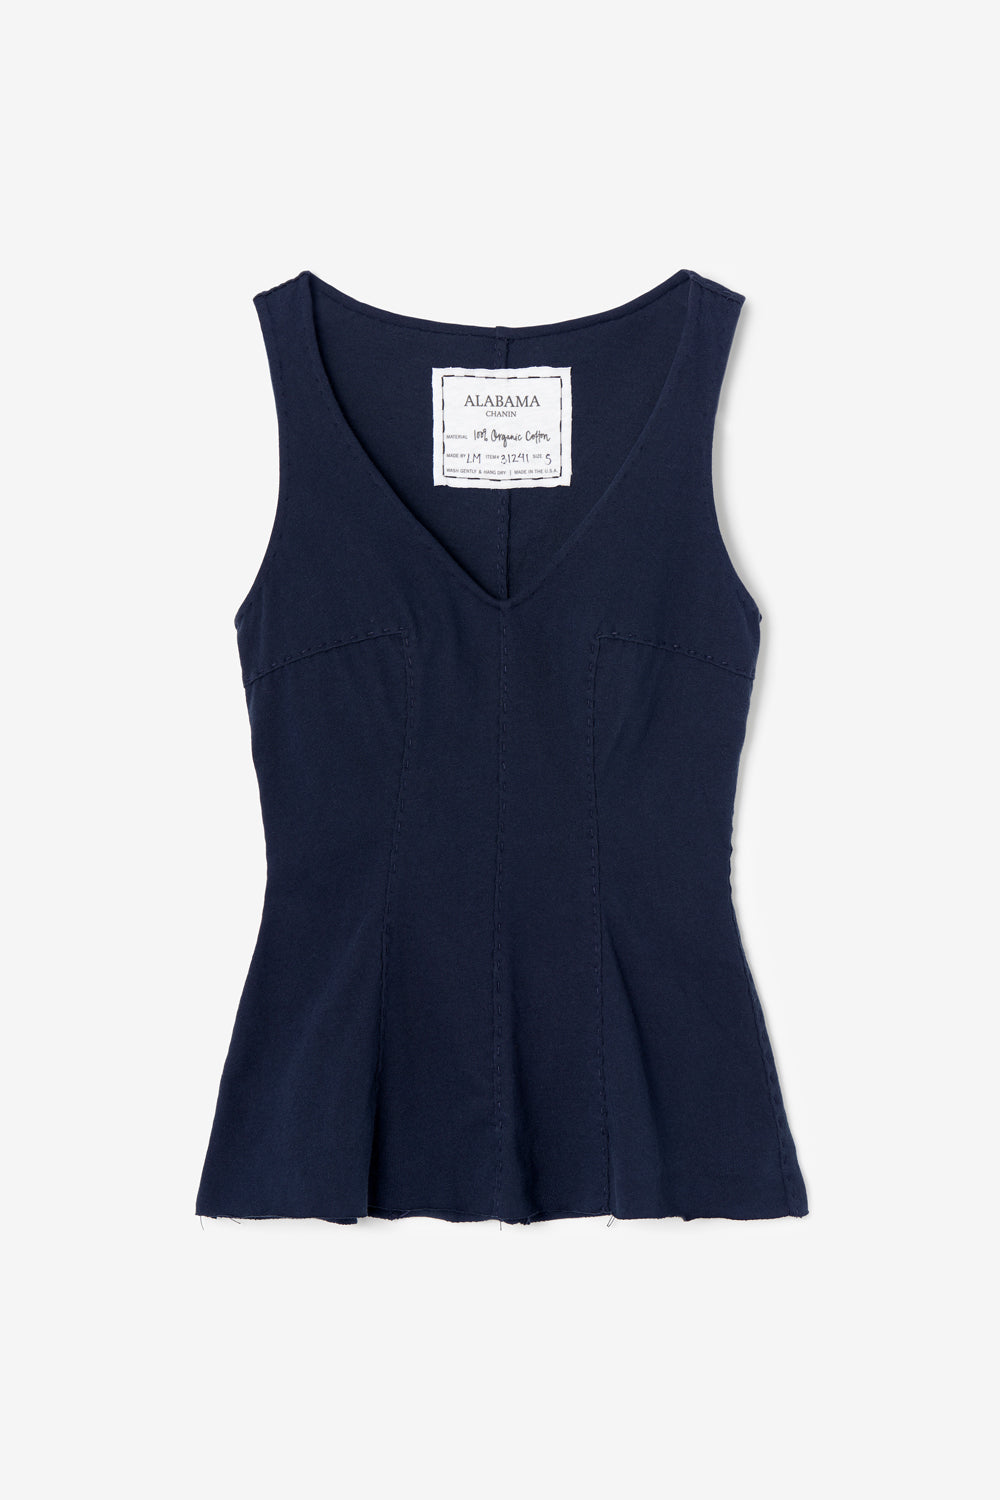 Alabama Chanin Lola Top in navy with elevated v-neck soft knit jersey 100% organic cotton.